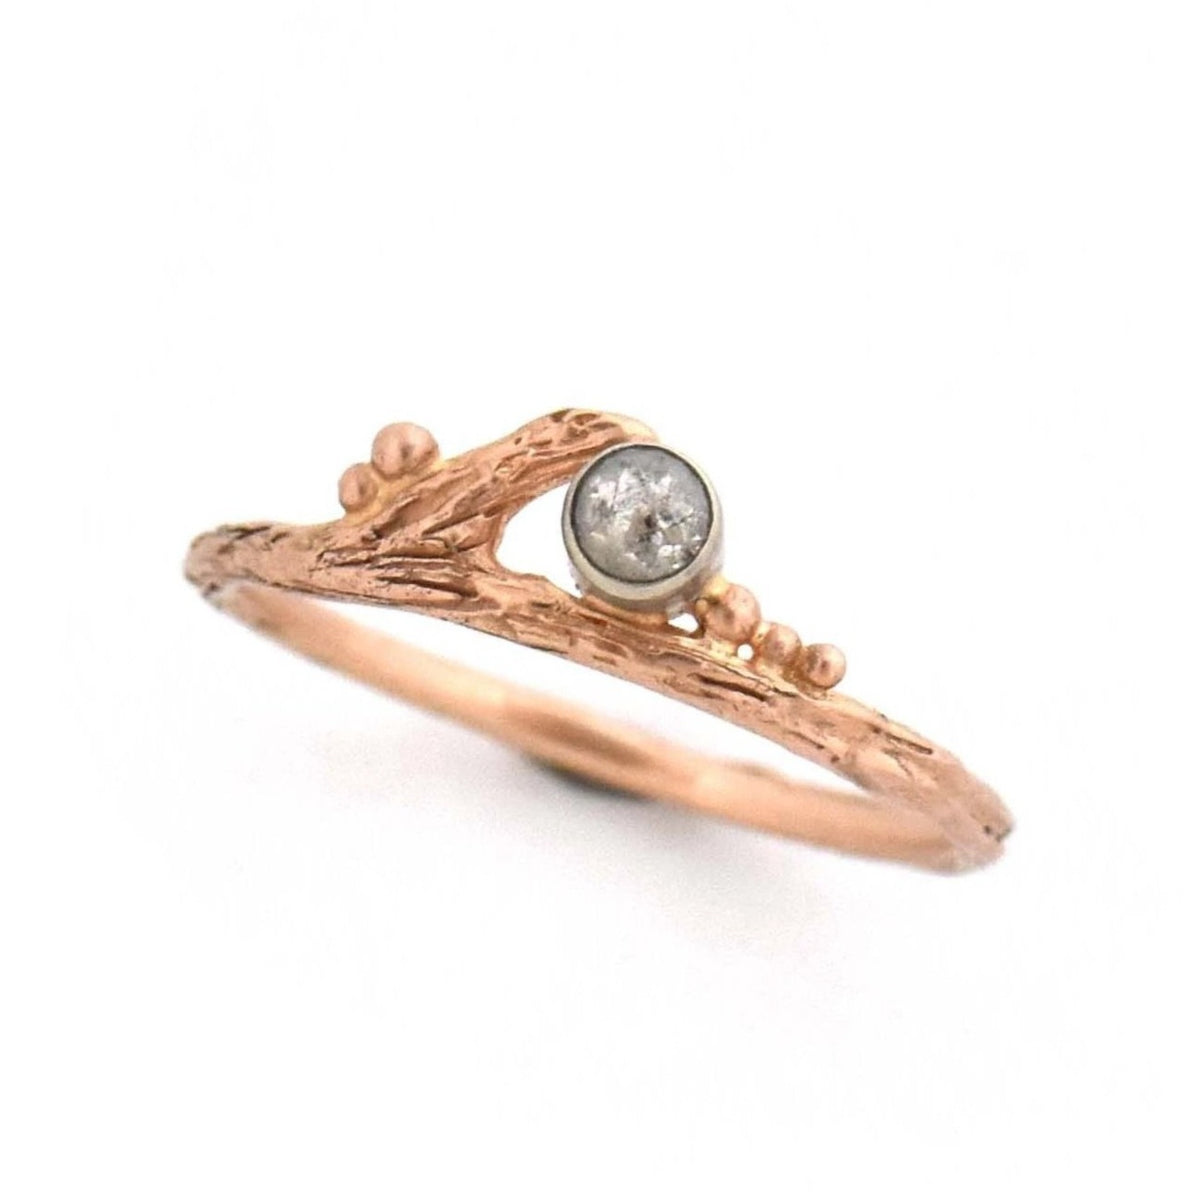 Gold Enchanted Rustic Diamond Twig Ring - your choice of gold - Wedding Ring 14K Rose Gold / Rustic Diamond 18K Palladium White Gold / Rustic Diamond 3157 - handmade by Beth Millner Jewelry